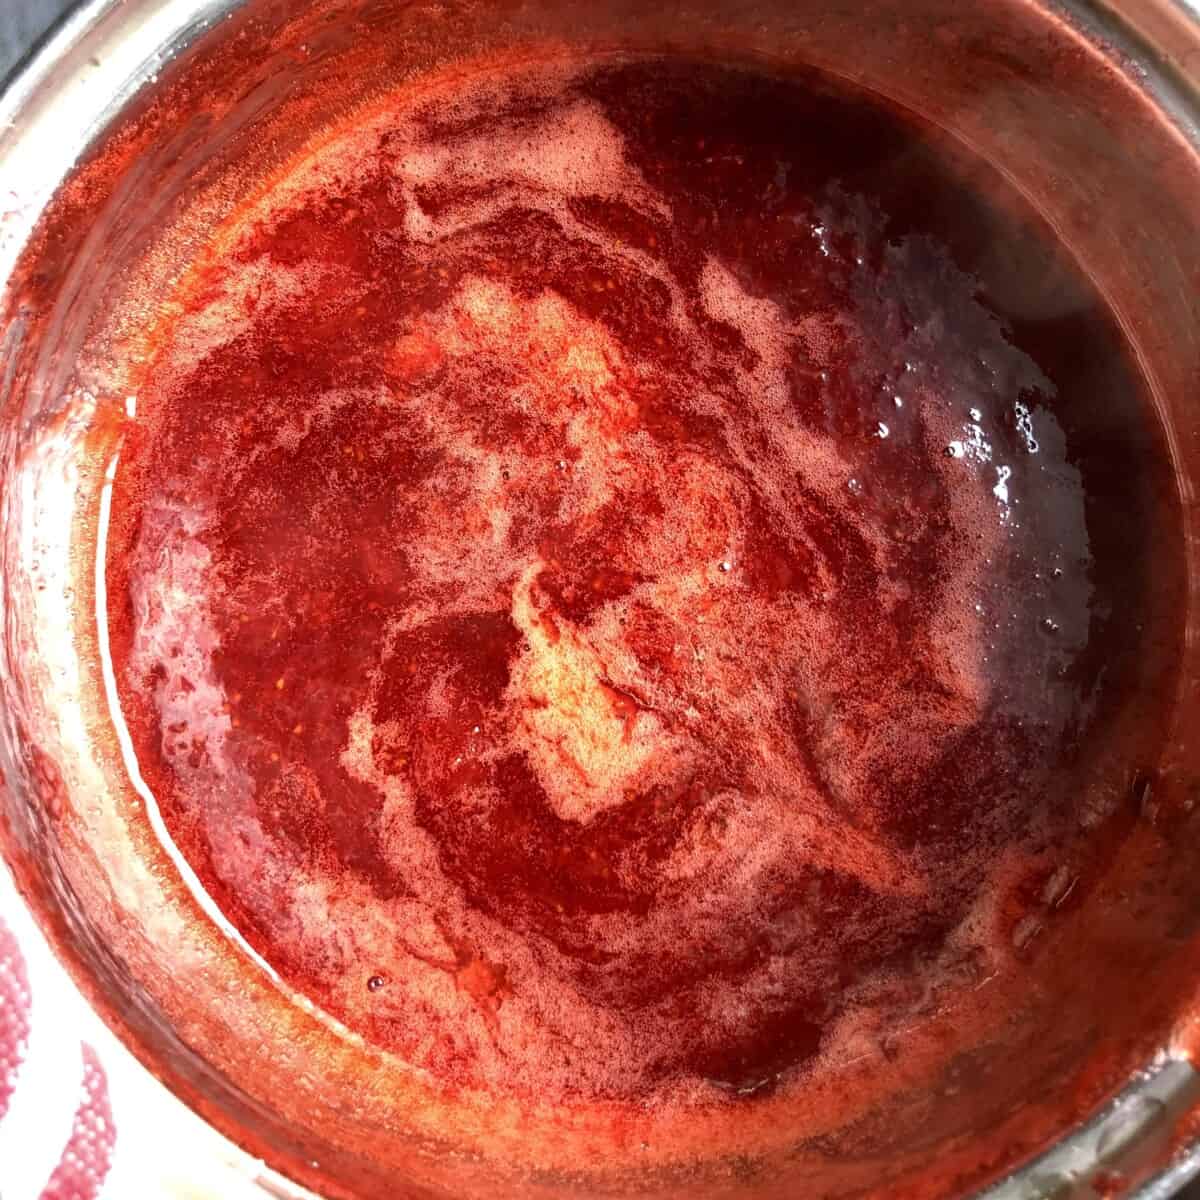 Just finished homemade strawberry jam in a pot.